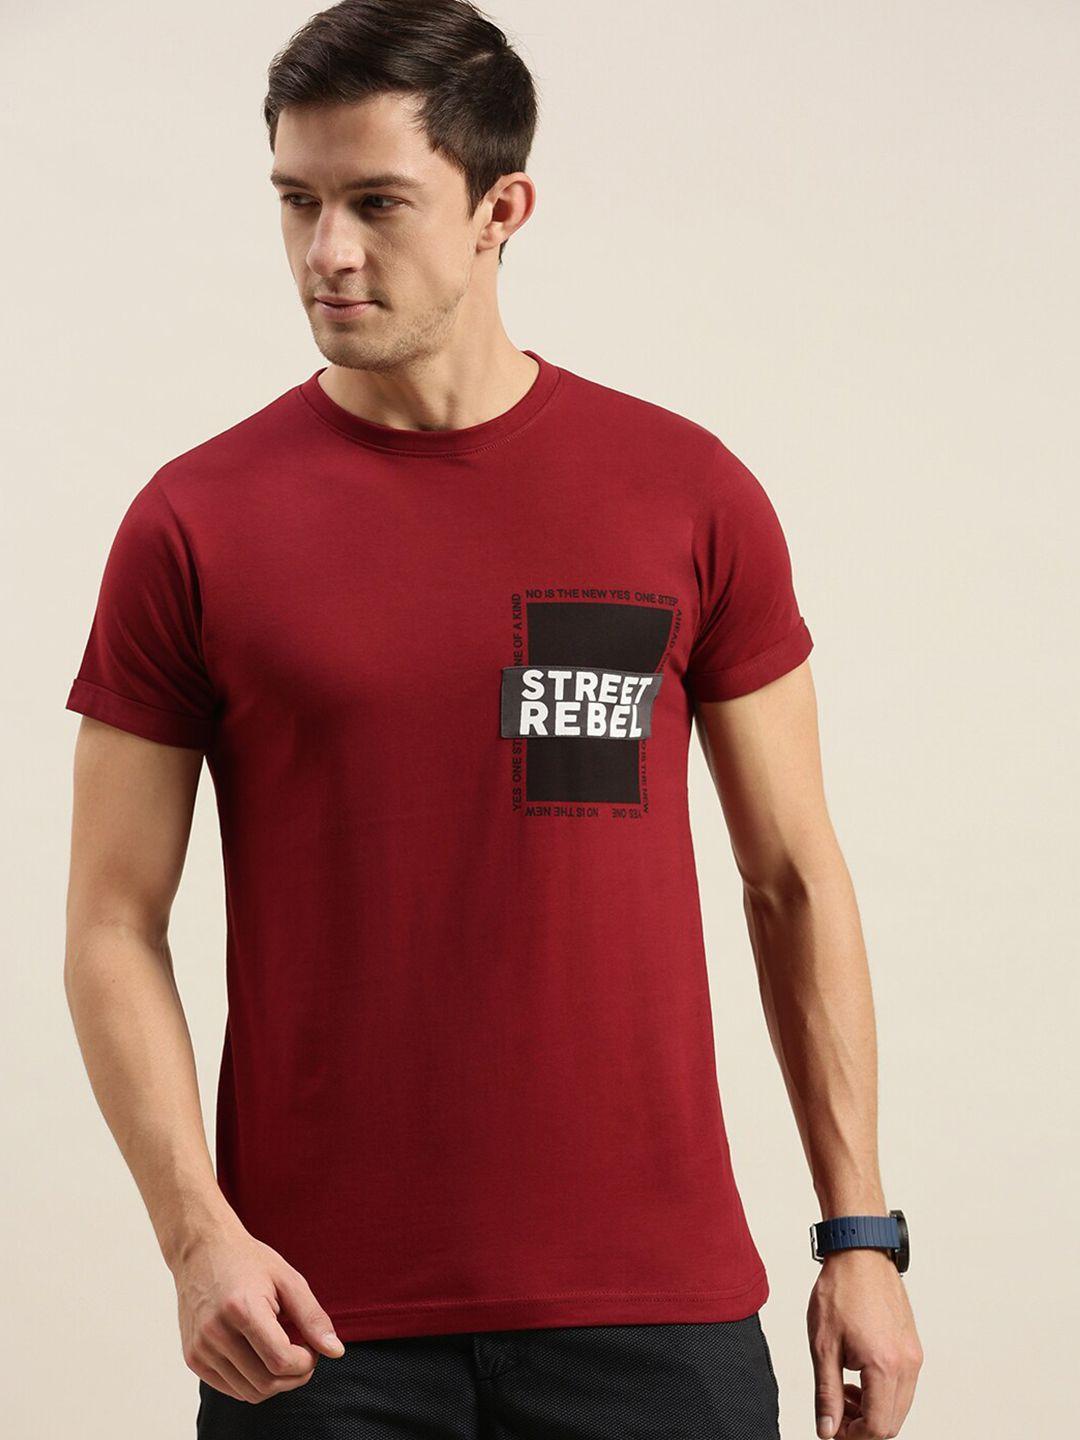 difference of opinion men maroon pockets t-shirt